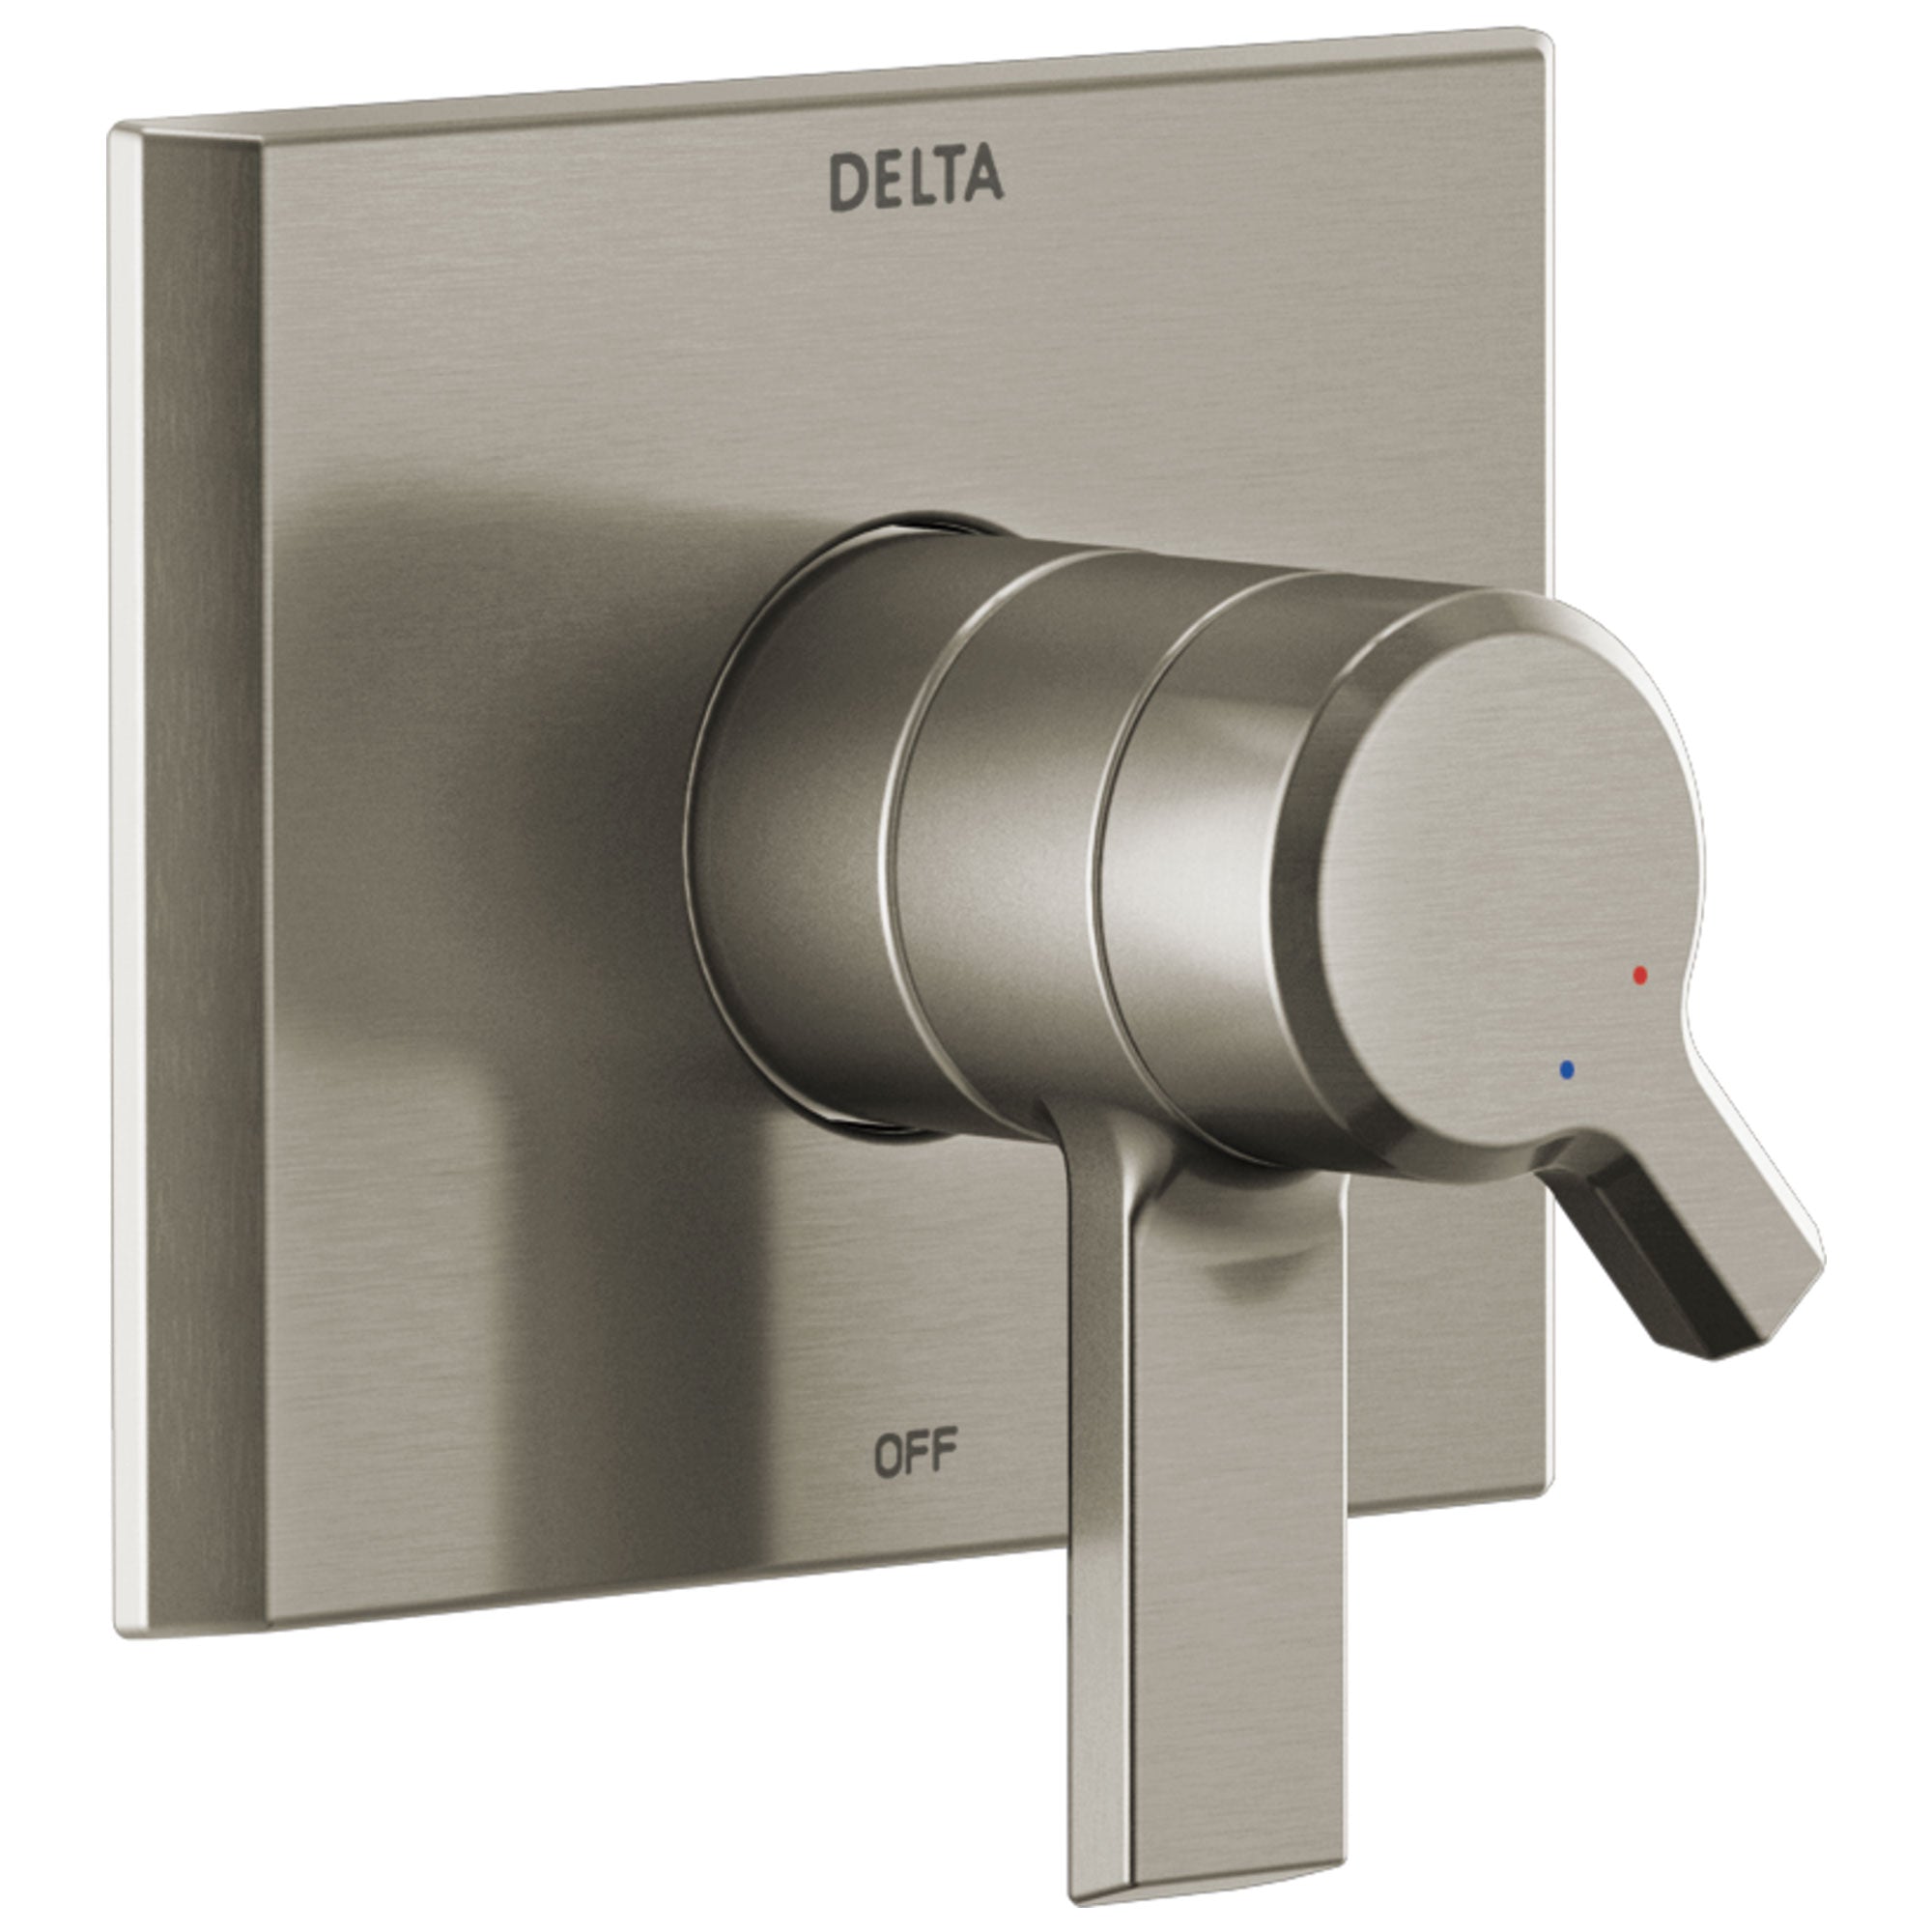 Delta Pivotal Modern Stainless Steel Finish Monitor 17 Series Shower Faucet Control Includes Handles, Cartridge, and Valve with Stops D3392V